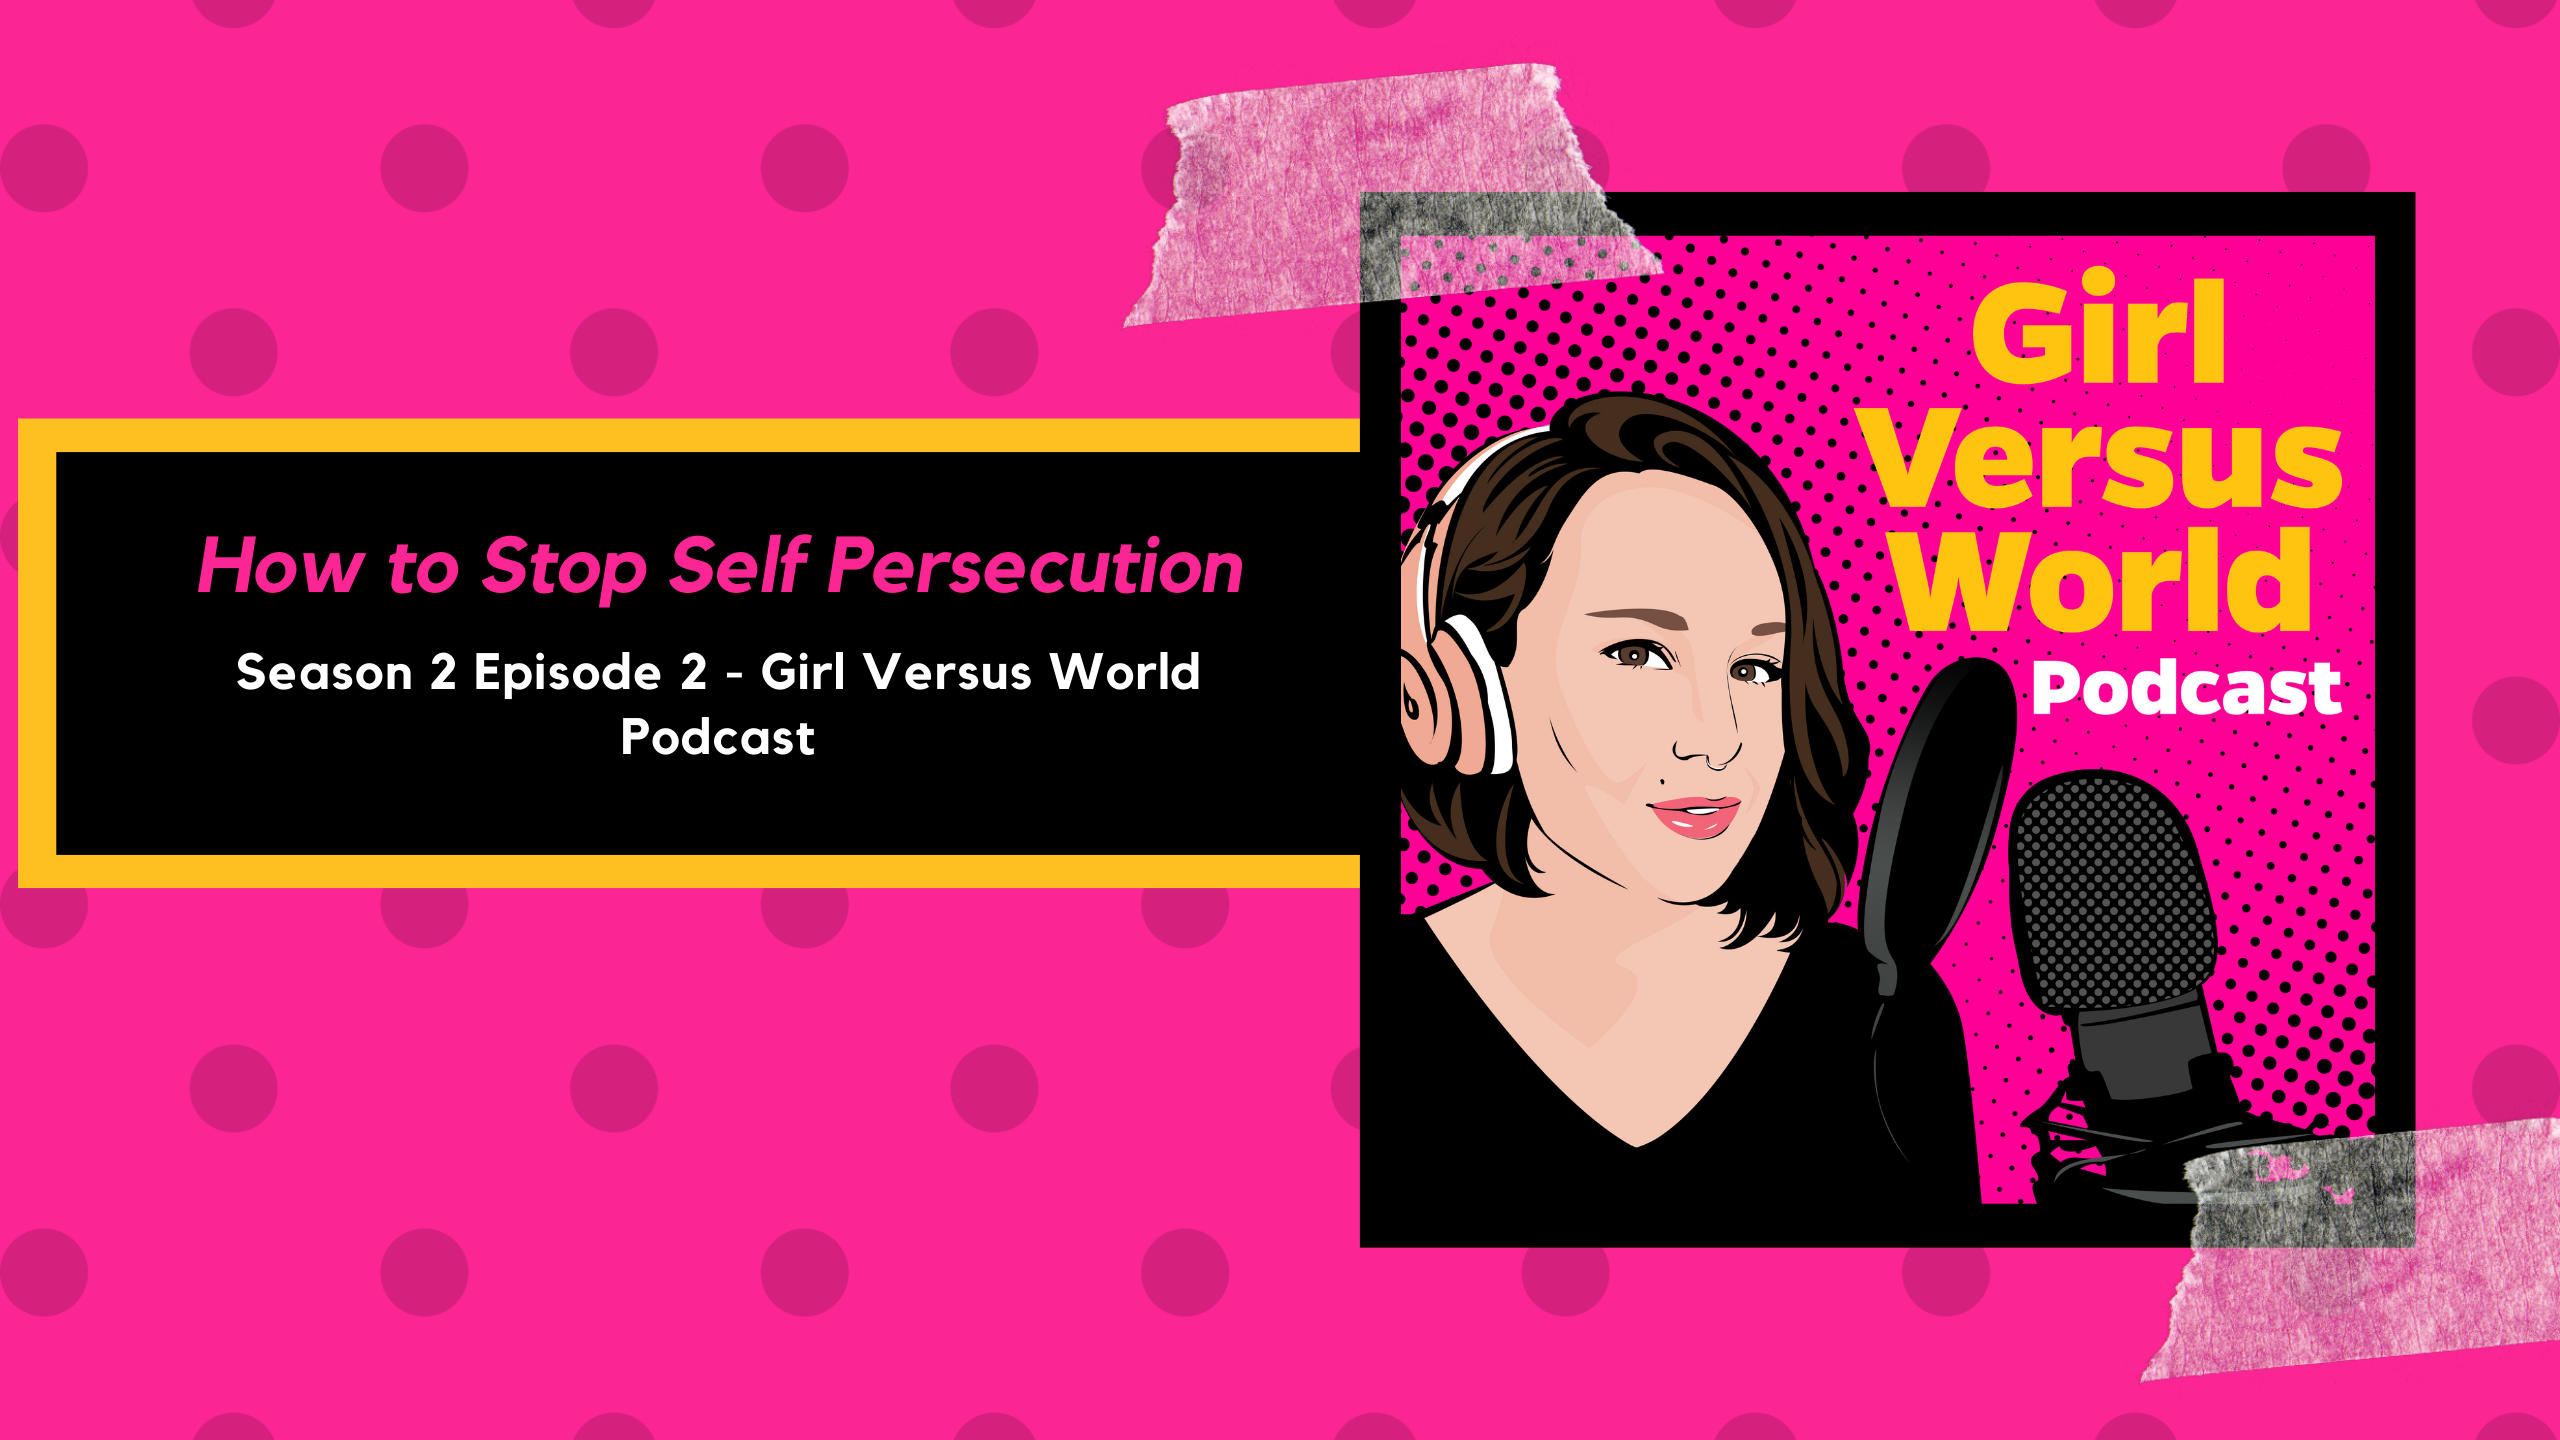 Podcast: S2E2 How to Stop Self Persecution